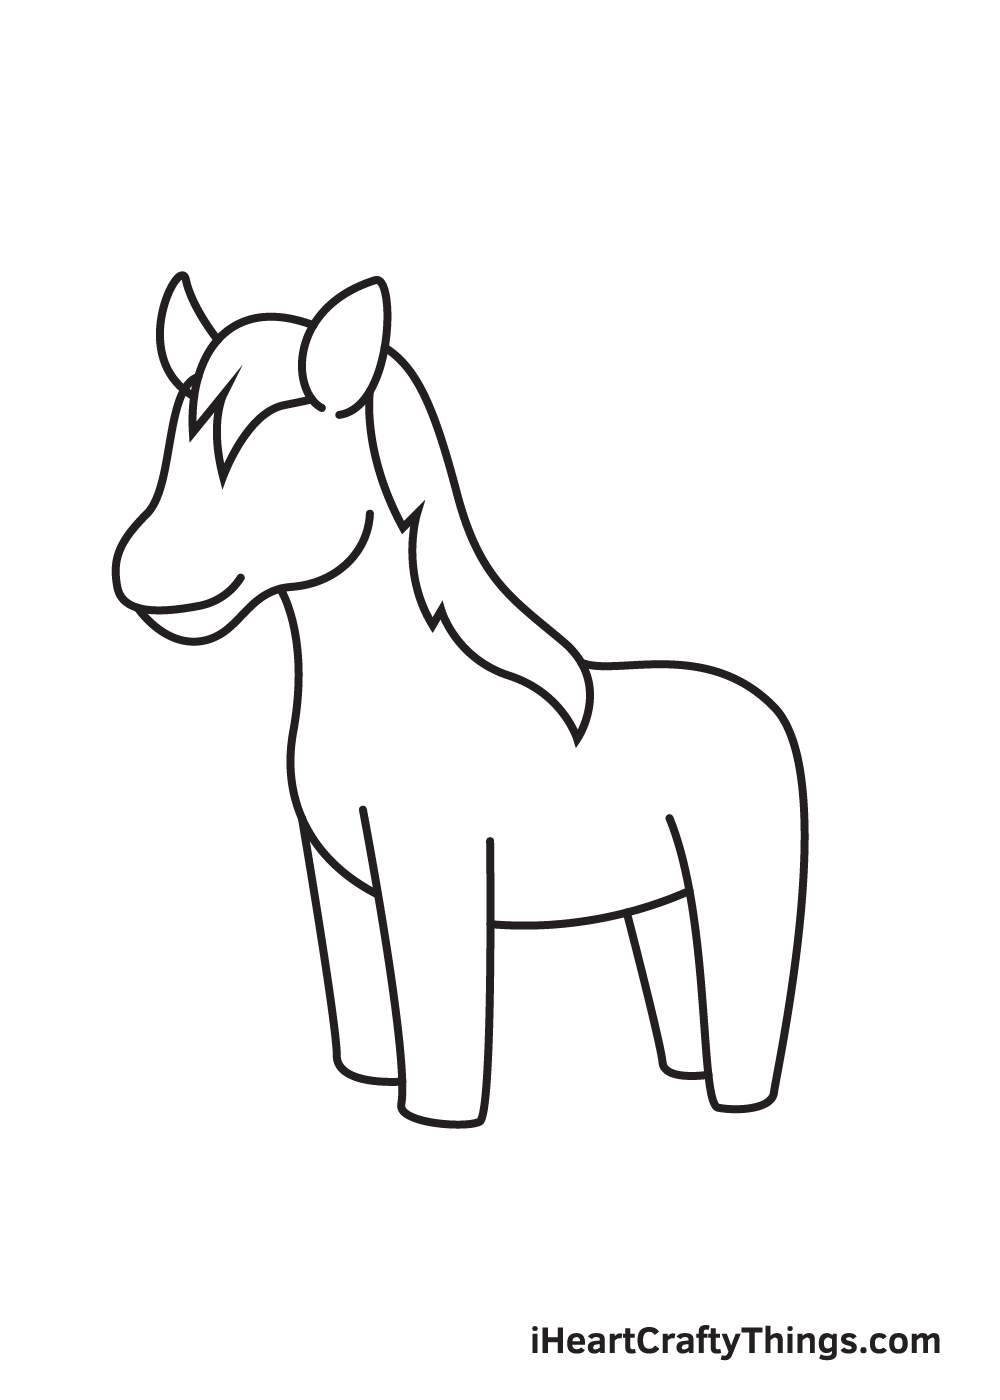 horse drawing - step 6